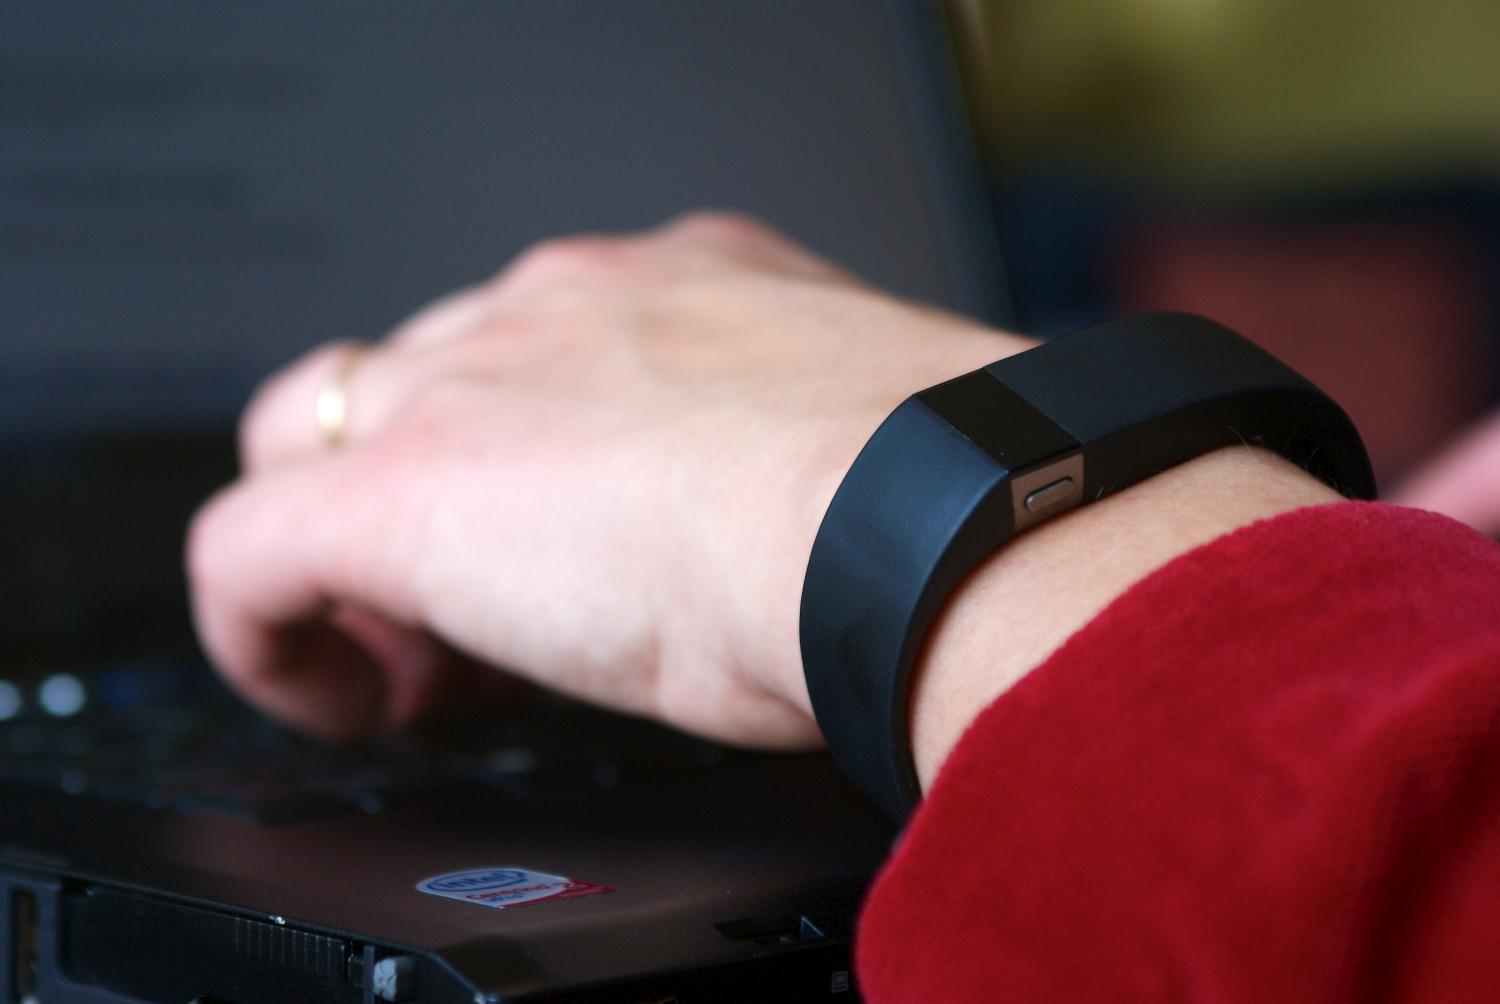 A person wearing a Fitbit fitness band types on a laptop (Getty Images)